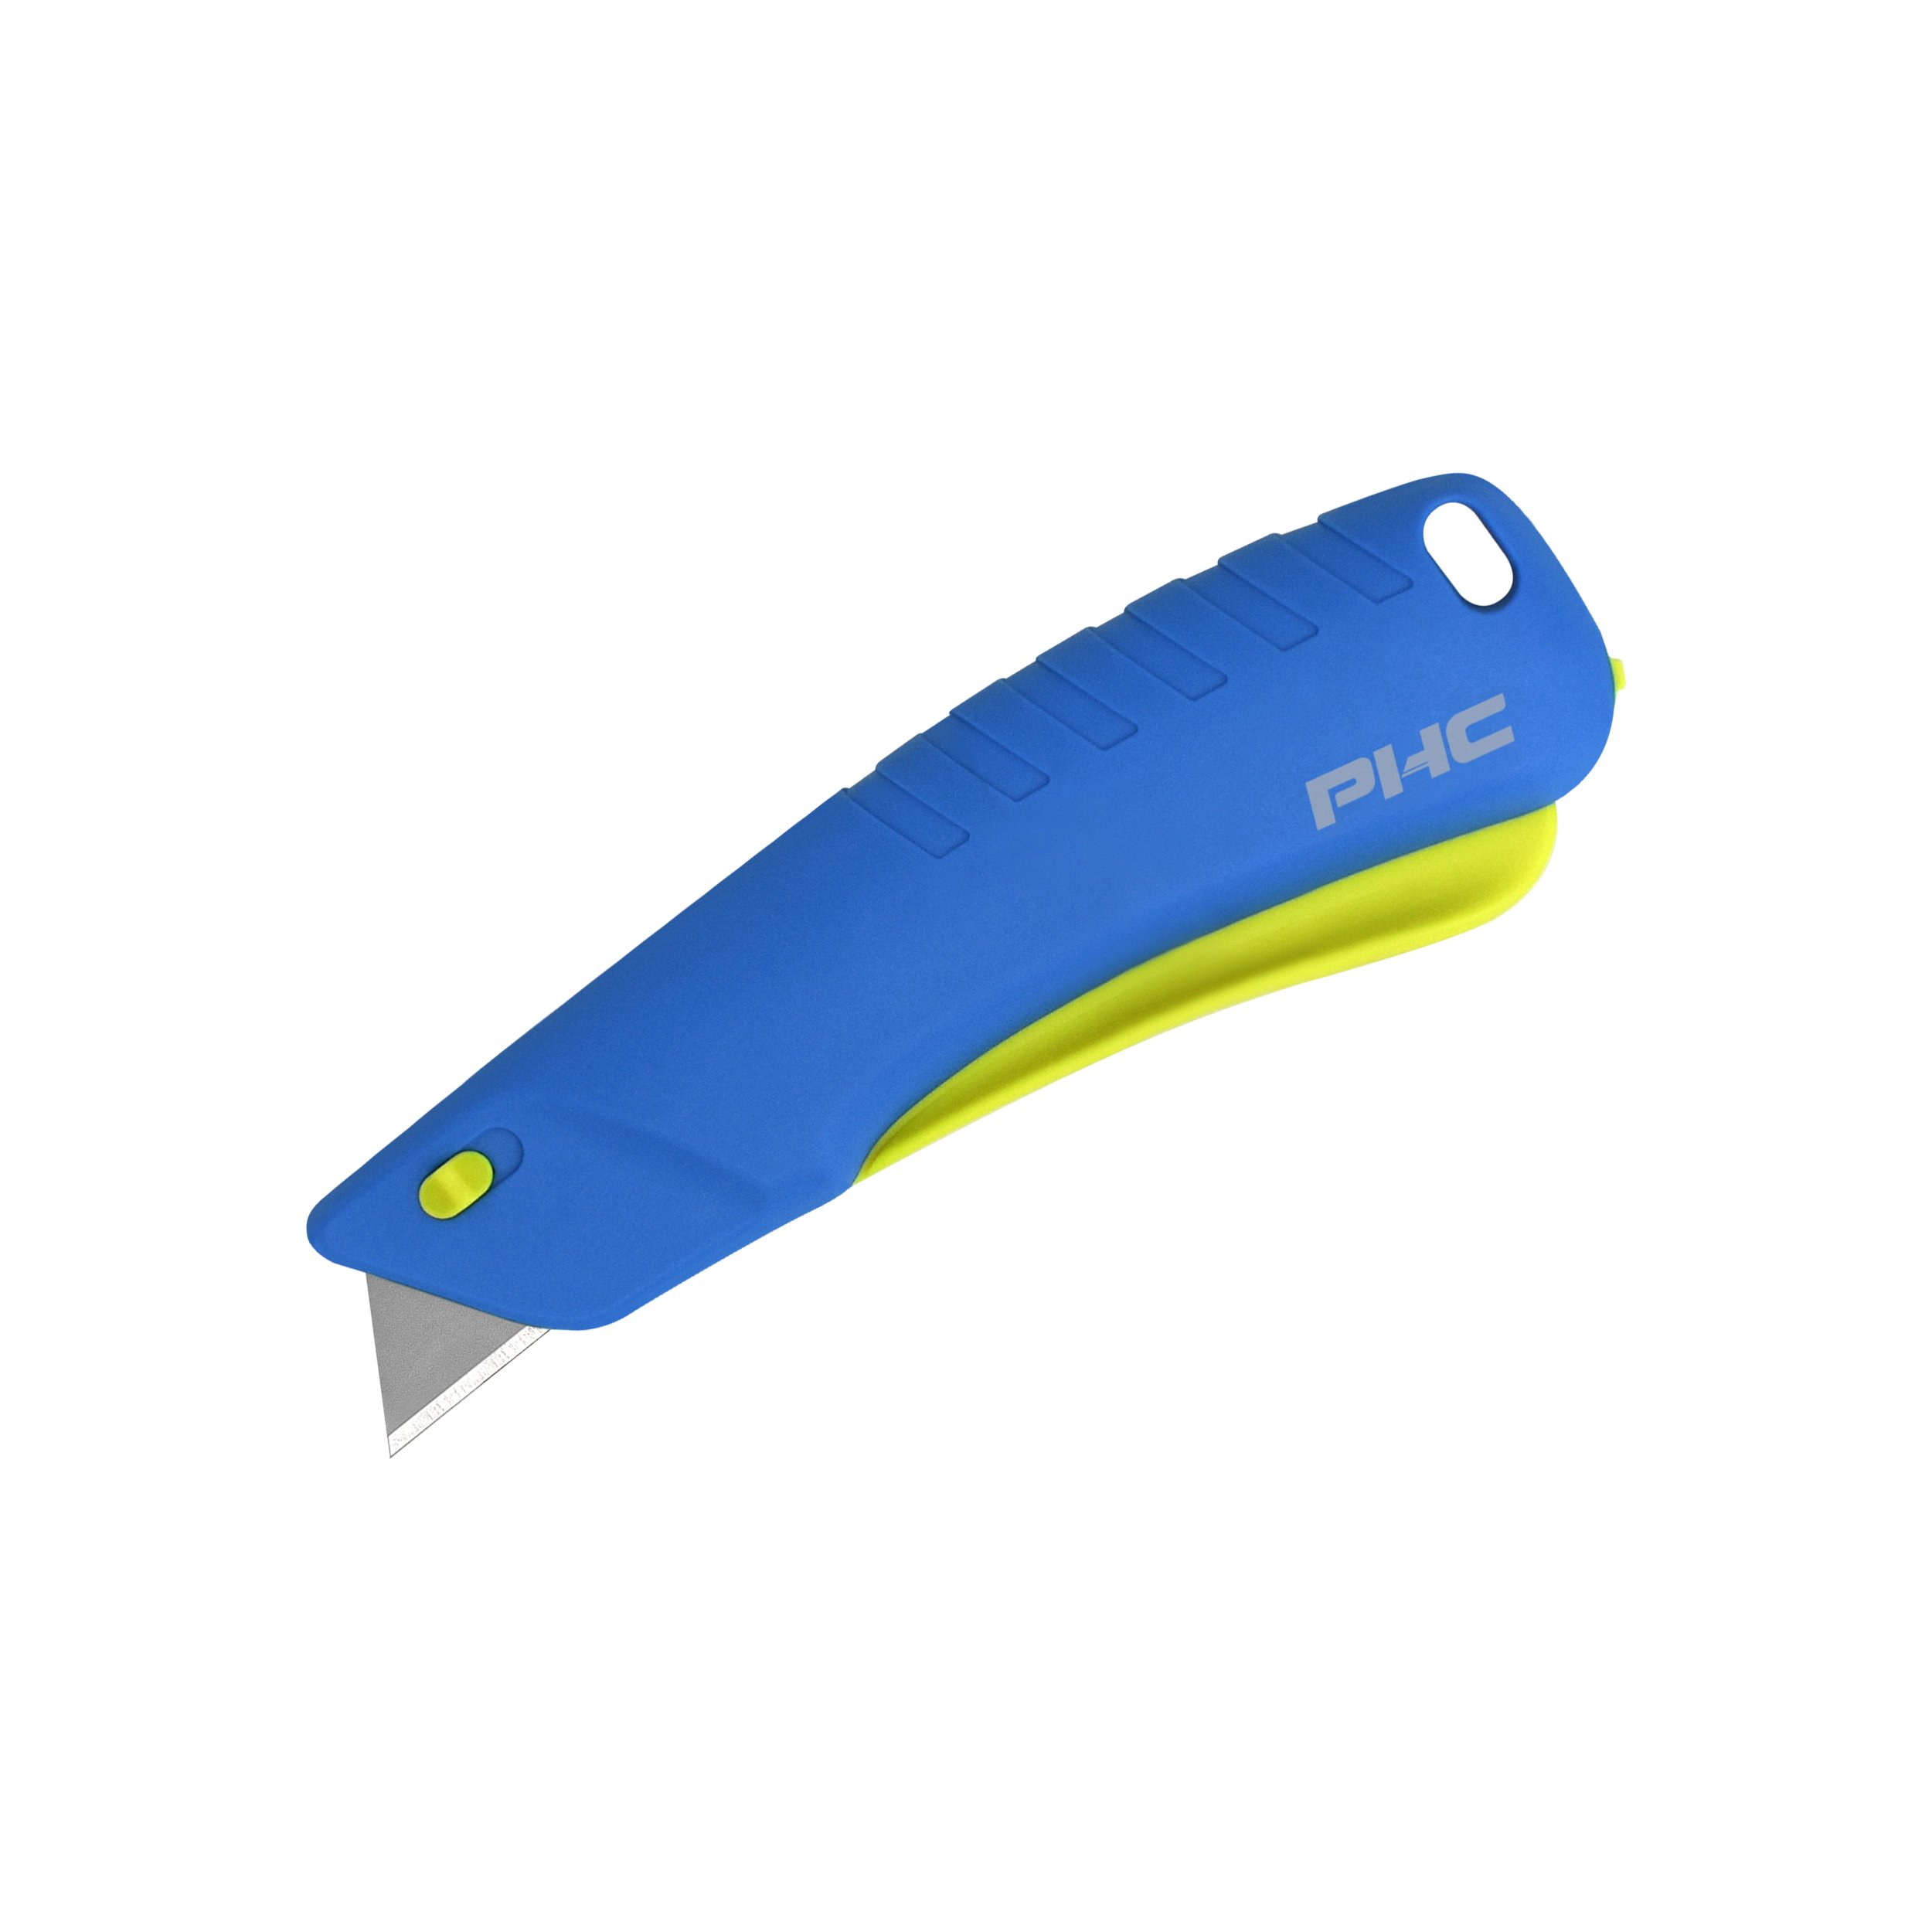 Auto-Retract Rebel Safety Knife